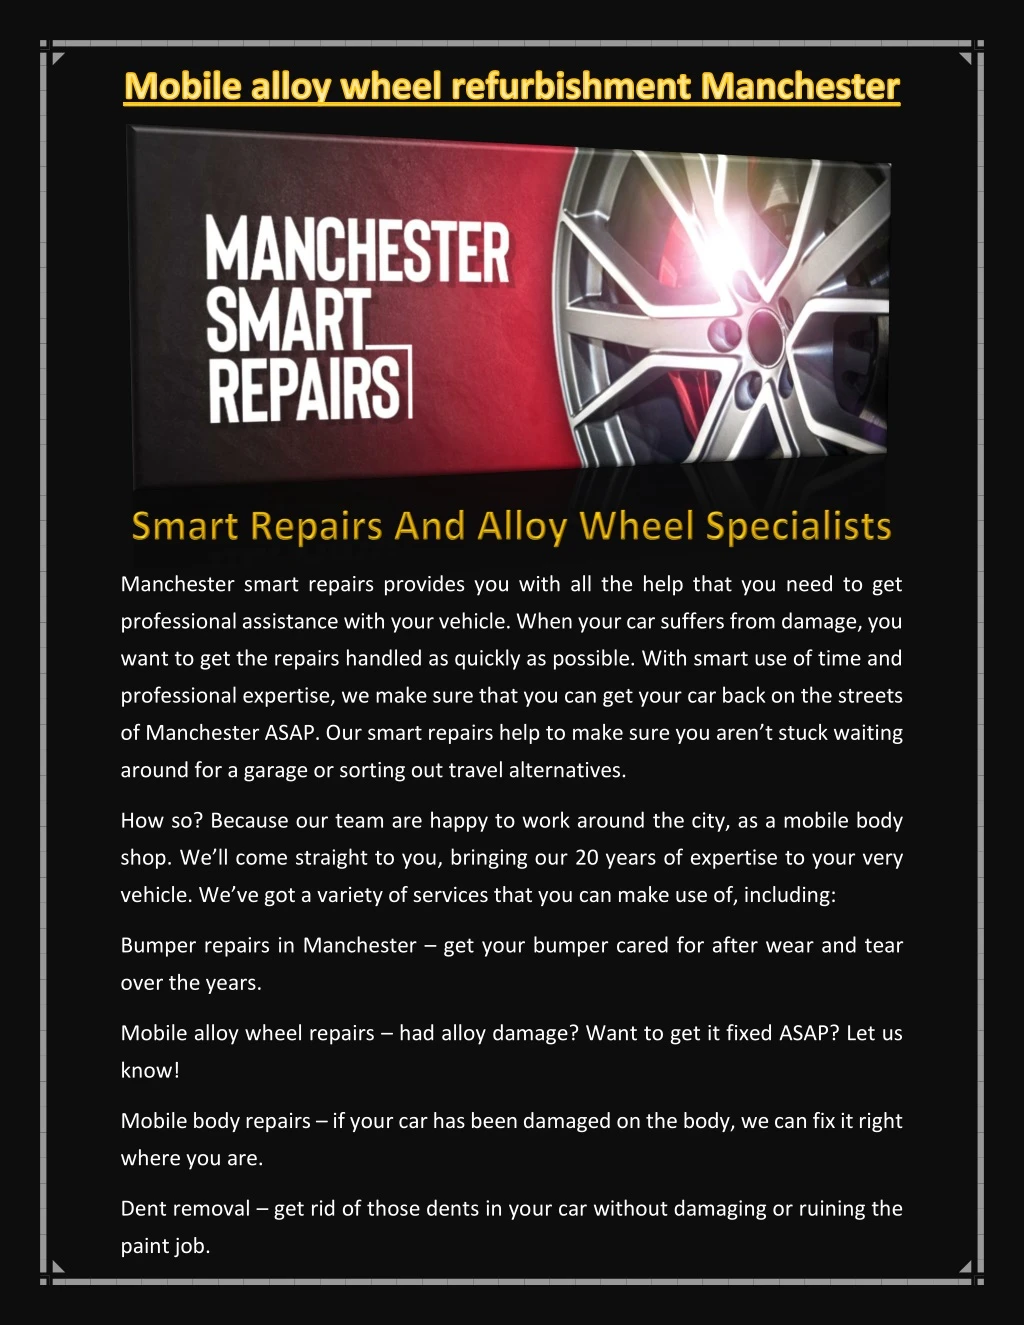 manchester smart repairs provides you with